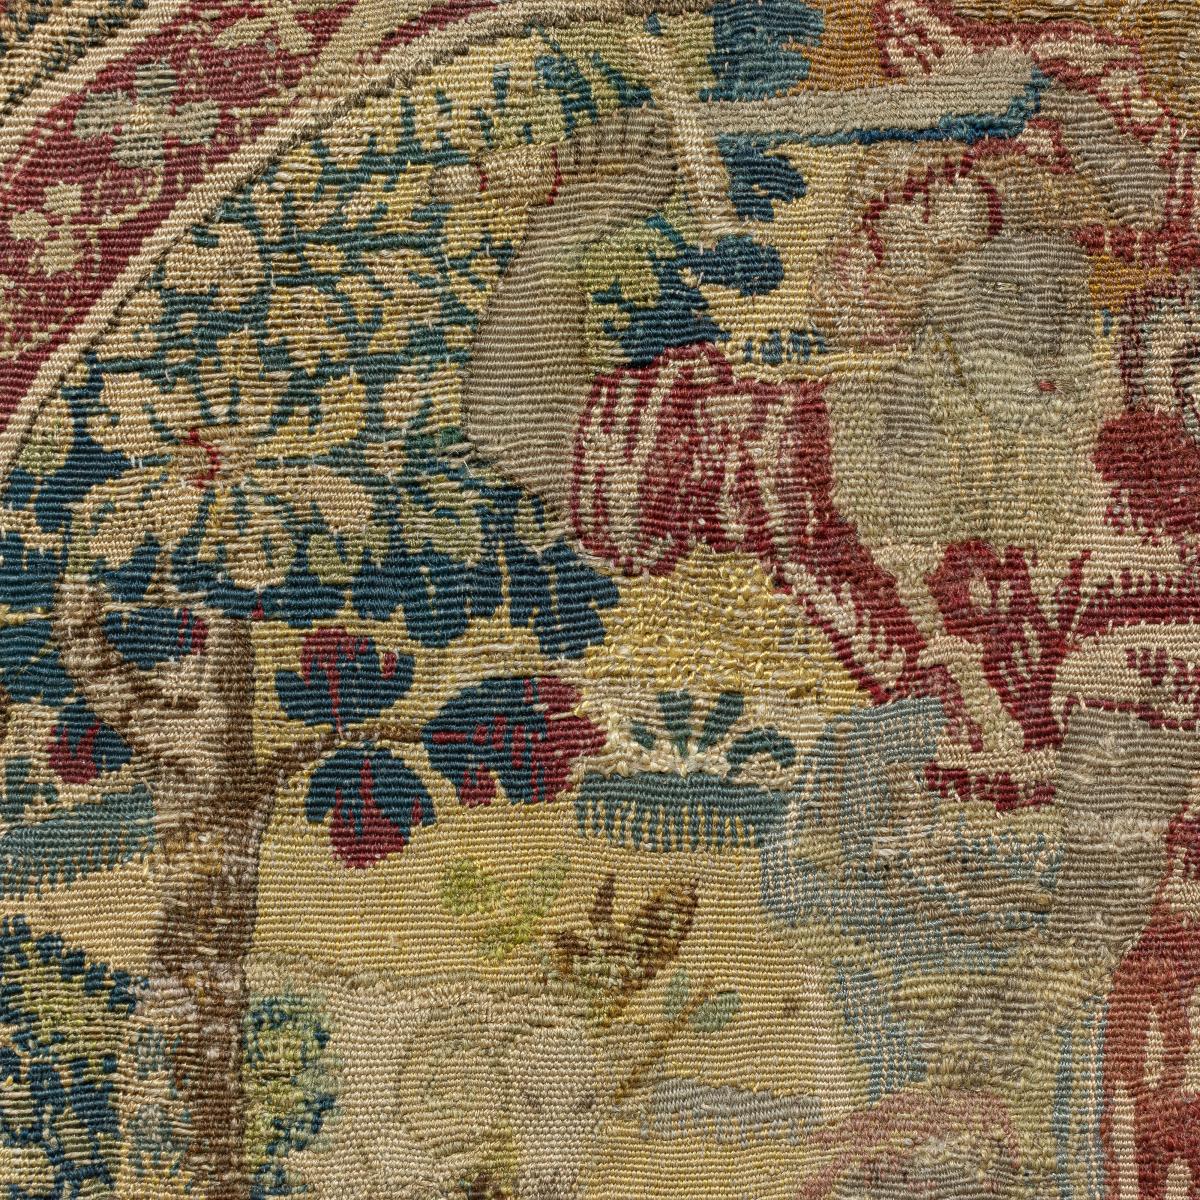 An antique tapestry cushion cover in a frame